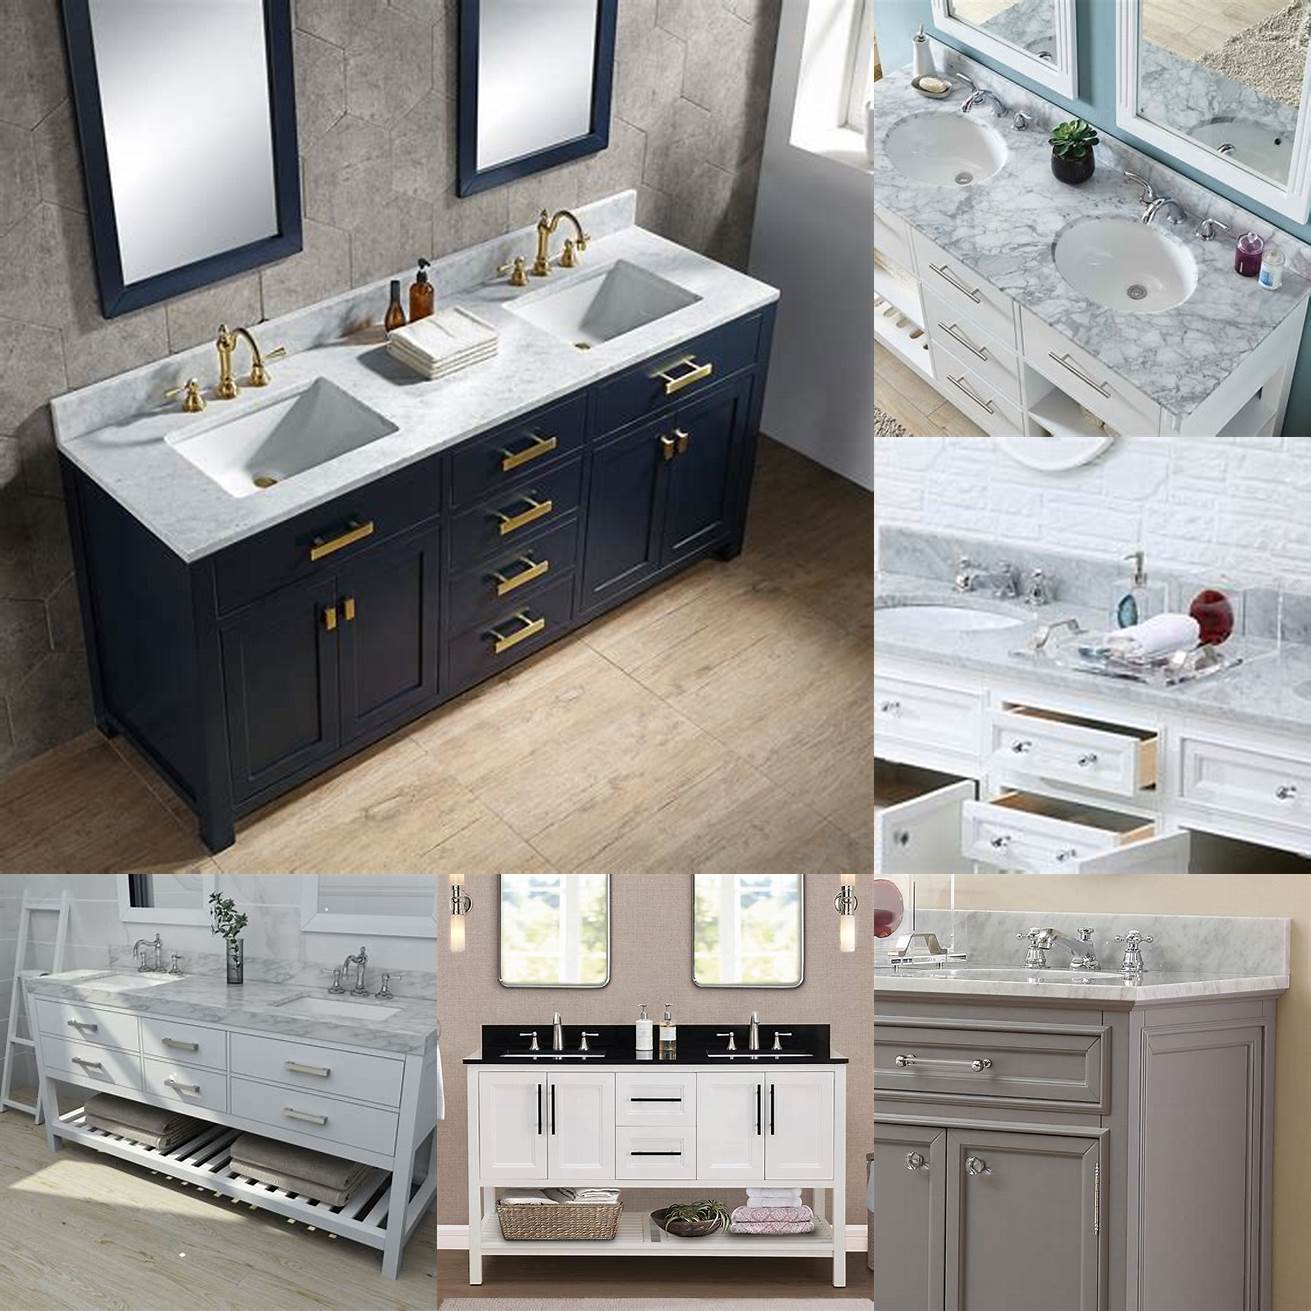 Double white vanity with marble top and undermount sinks